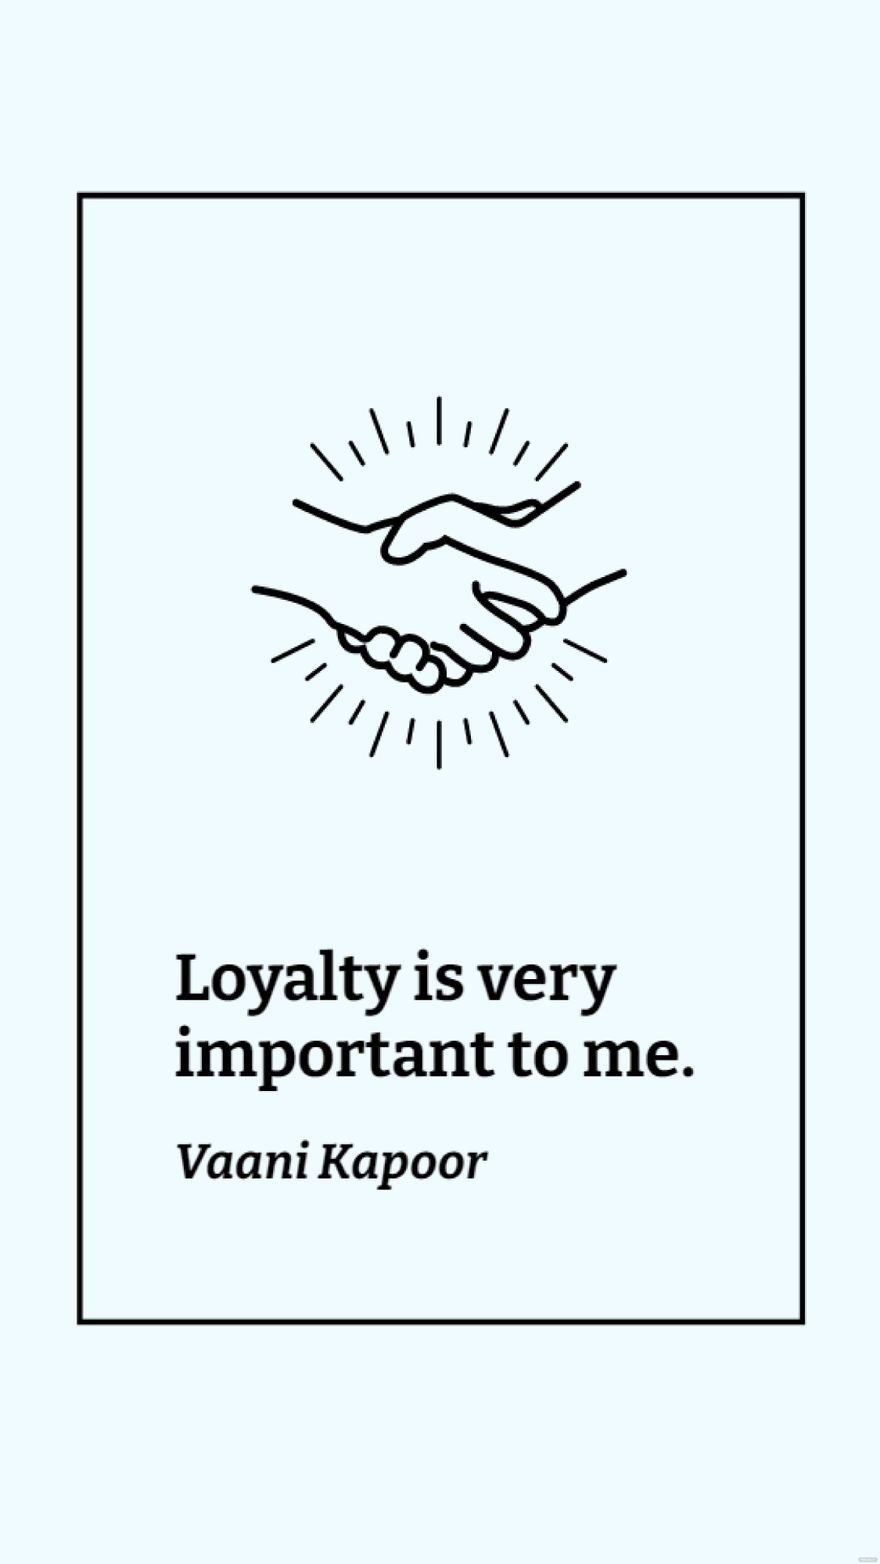 Vaani Kapoor - Loyalty is very important to me.